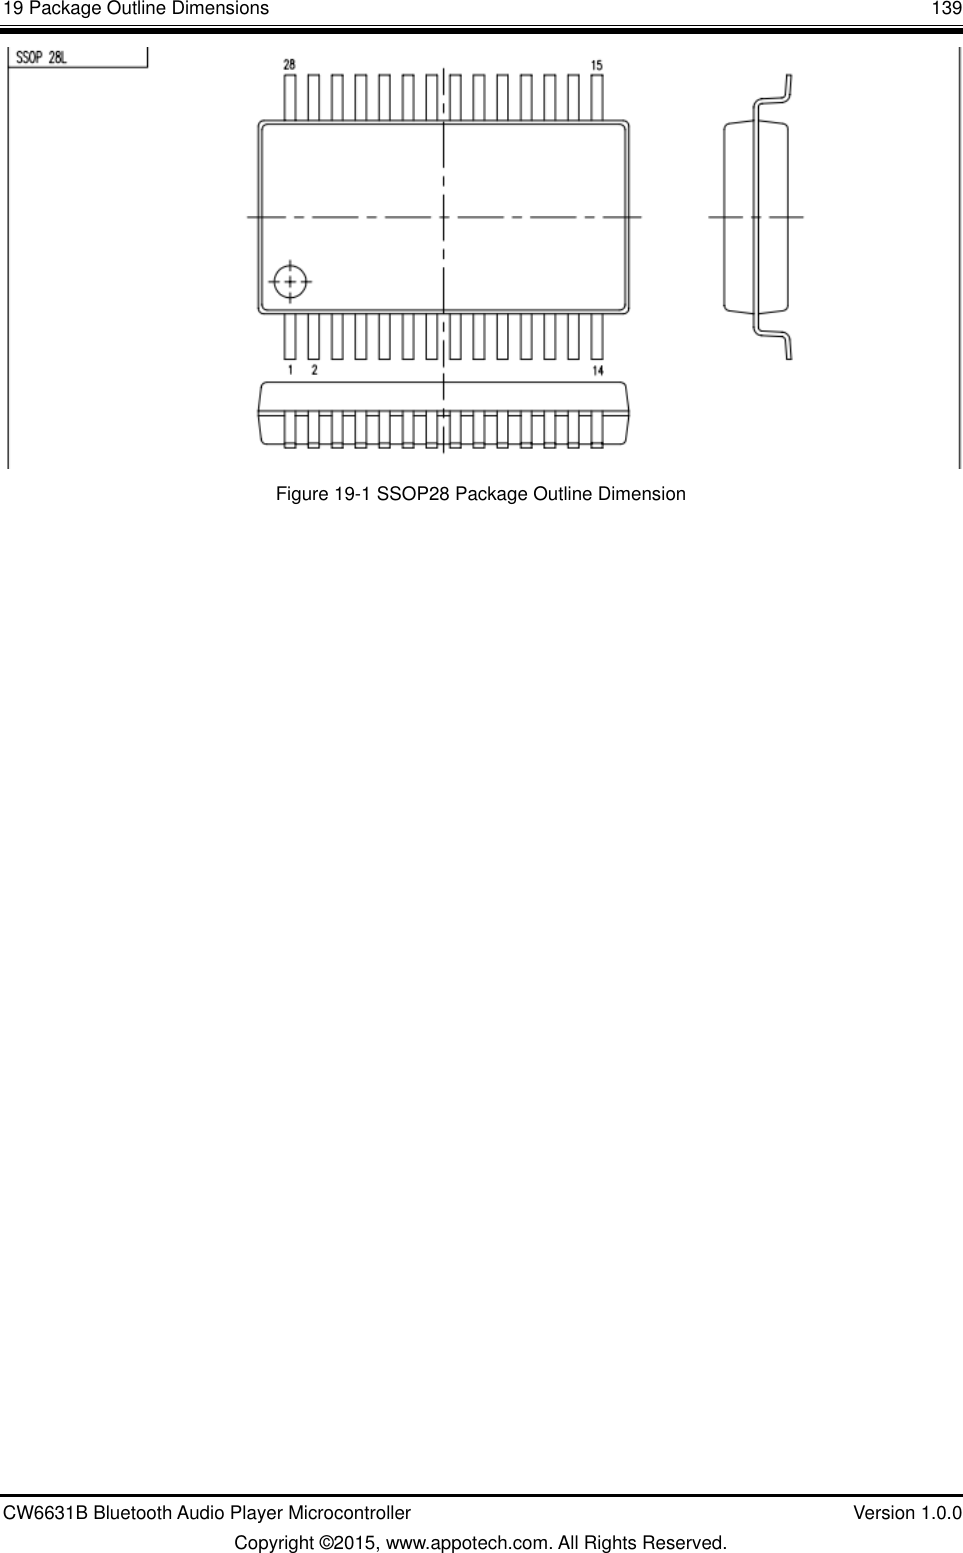 19 Package Outline Dimensions       139 CW6631B Bluetooth Audio Player Microcontroller    Version 1.0.0 Copyright ©2015, www.appotech.com. All Rights Reserved.  Figure 19-1 SSOP28 Package Outline Dimension   